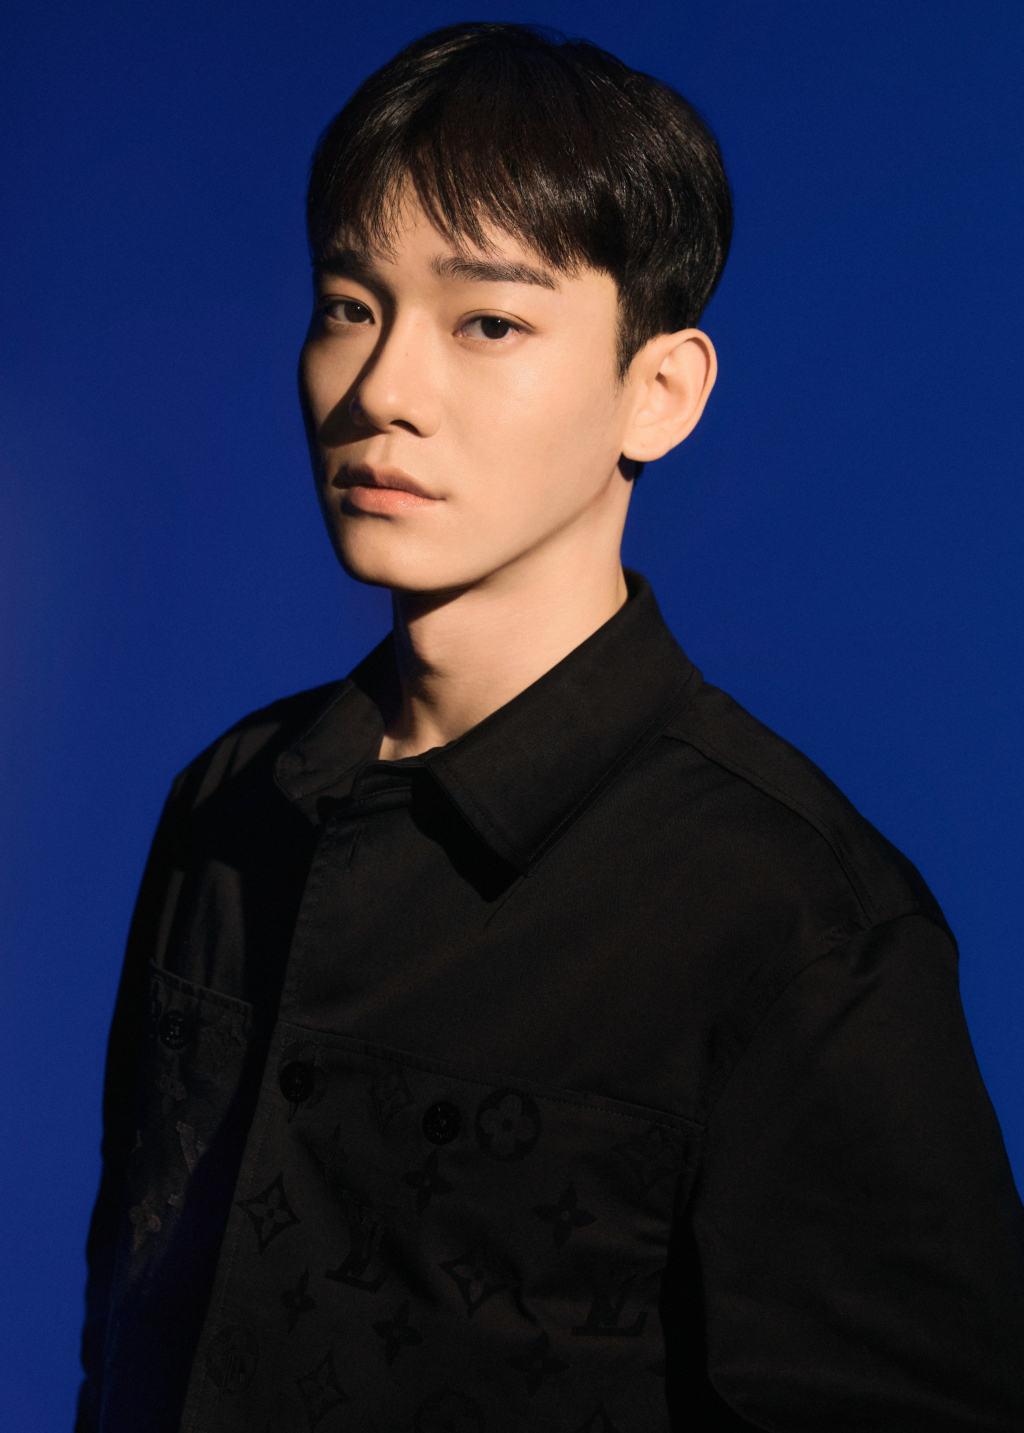 EXO's member Chen, who is also actively working as a solo artist, has finally announced his comeback with a new mini album after a long wait